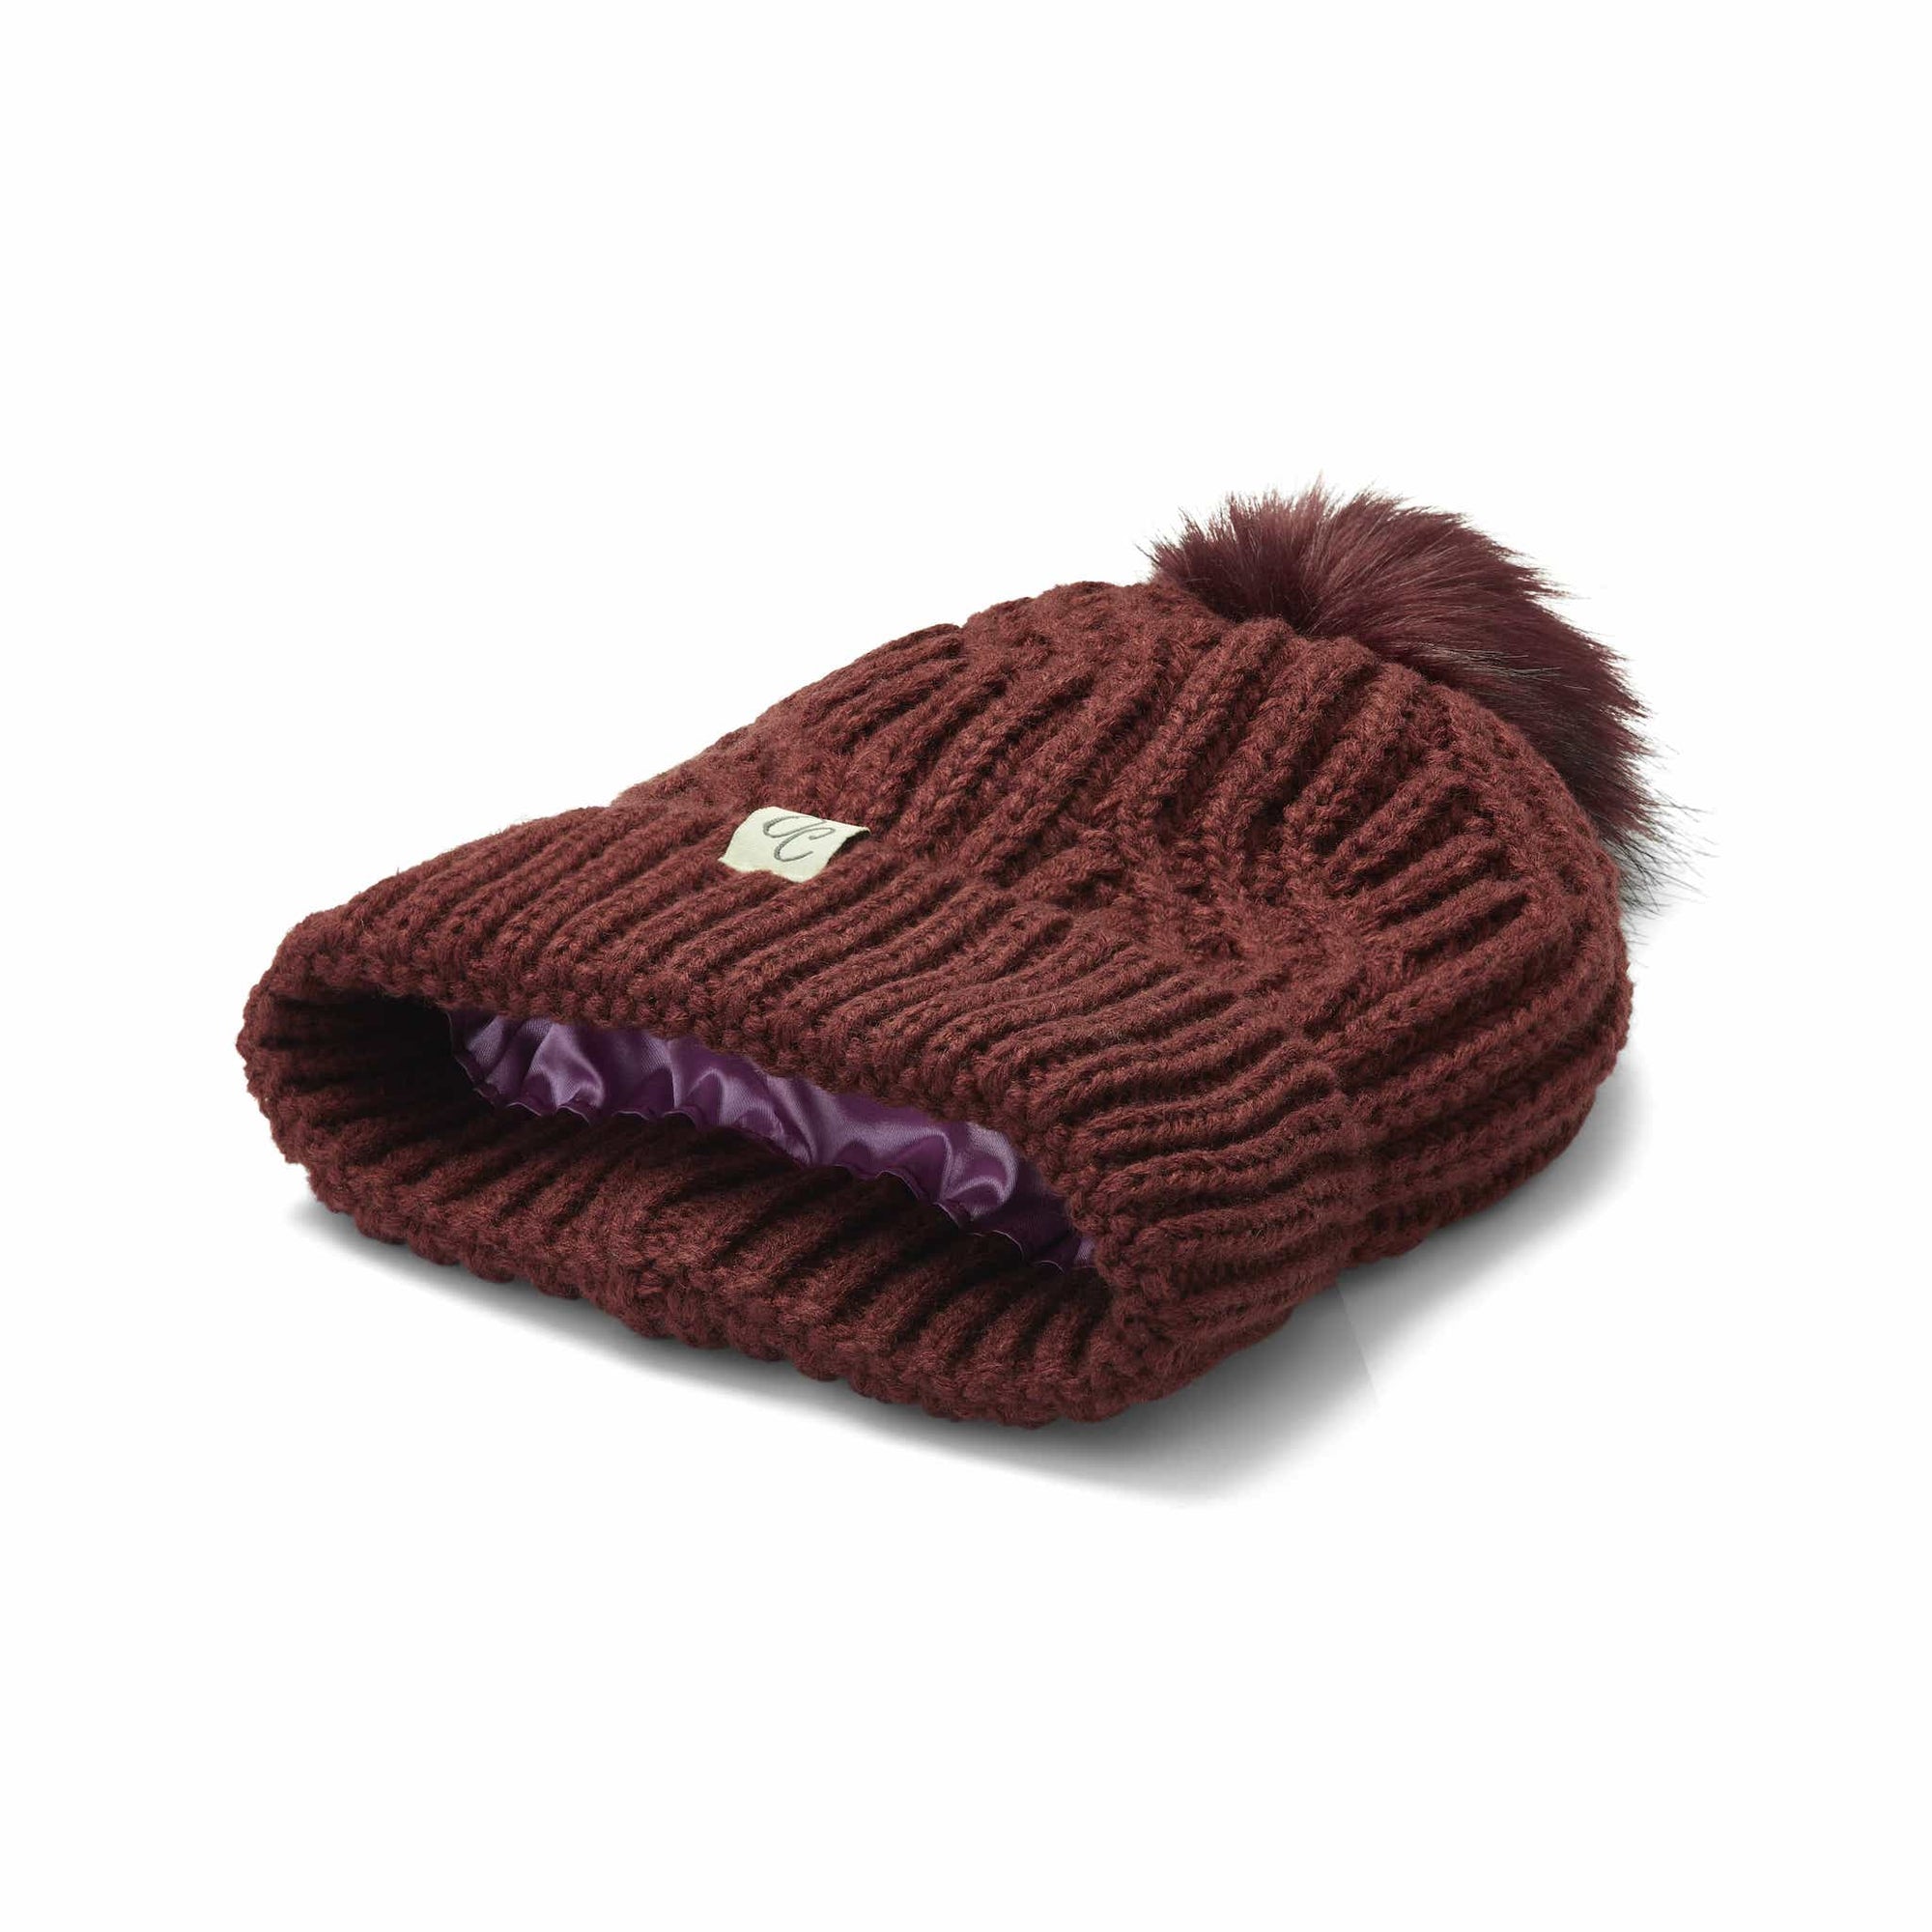 Only Curls Satin Lined Knitted Beanie Hat - Burgundy with Pom Pom - Only Curls